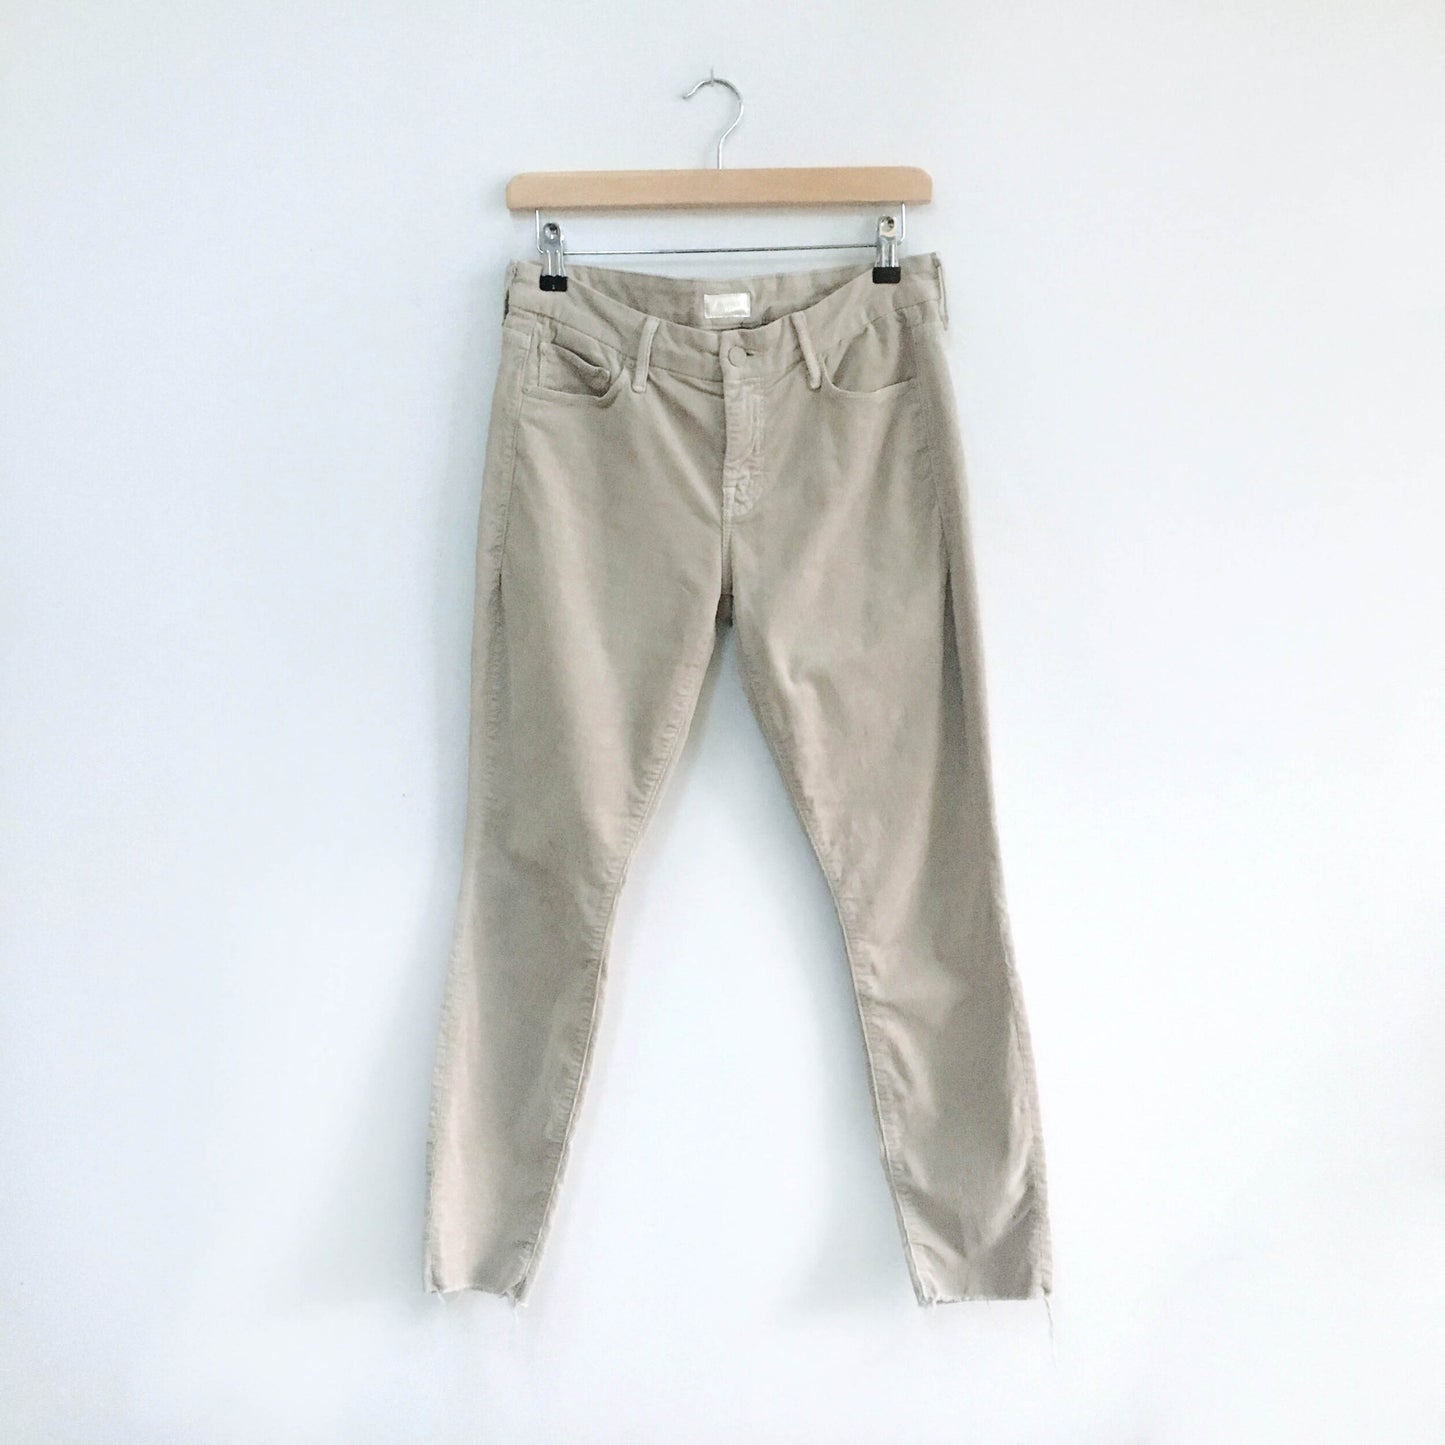 MOTHER The Looker Fray Cords  - size 28